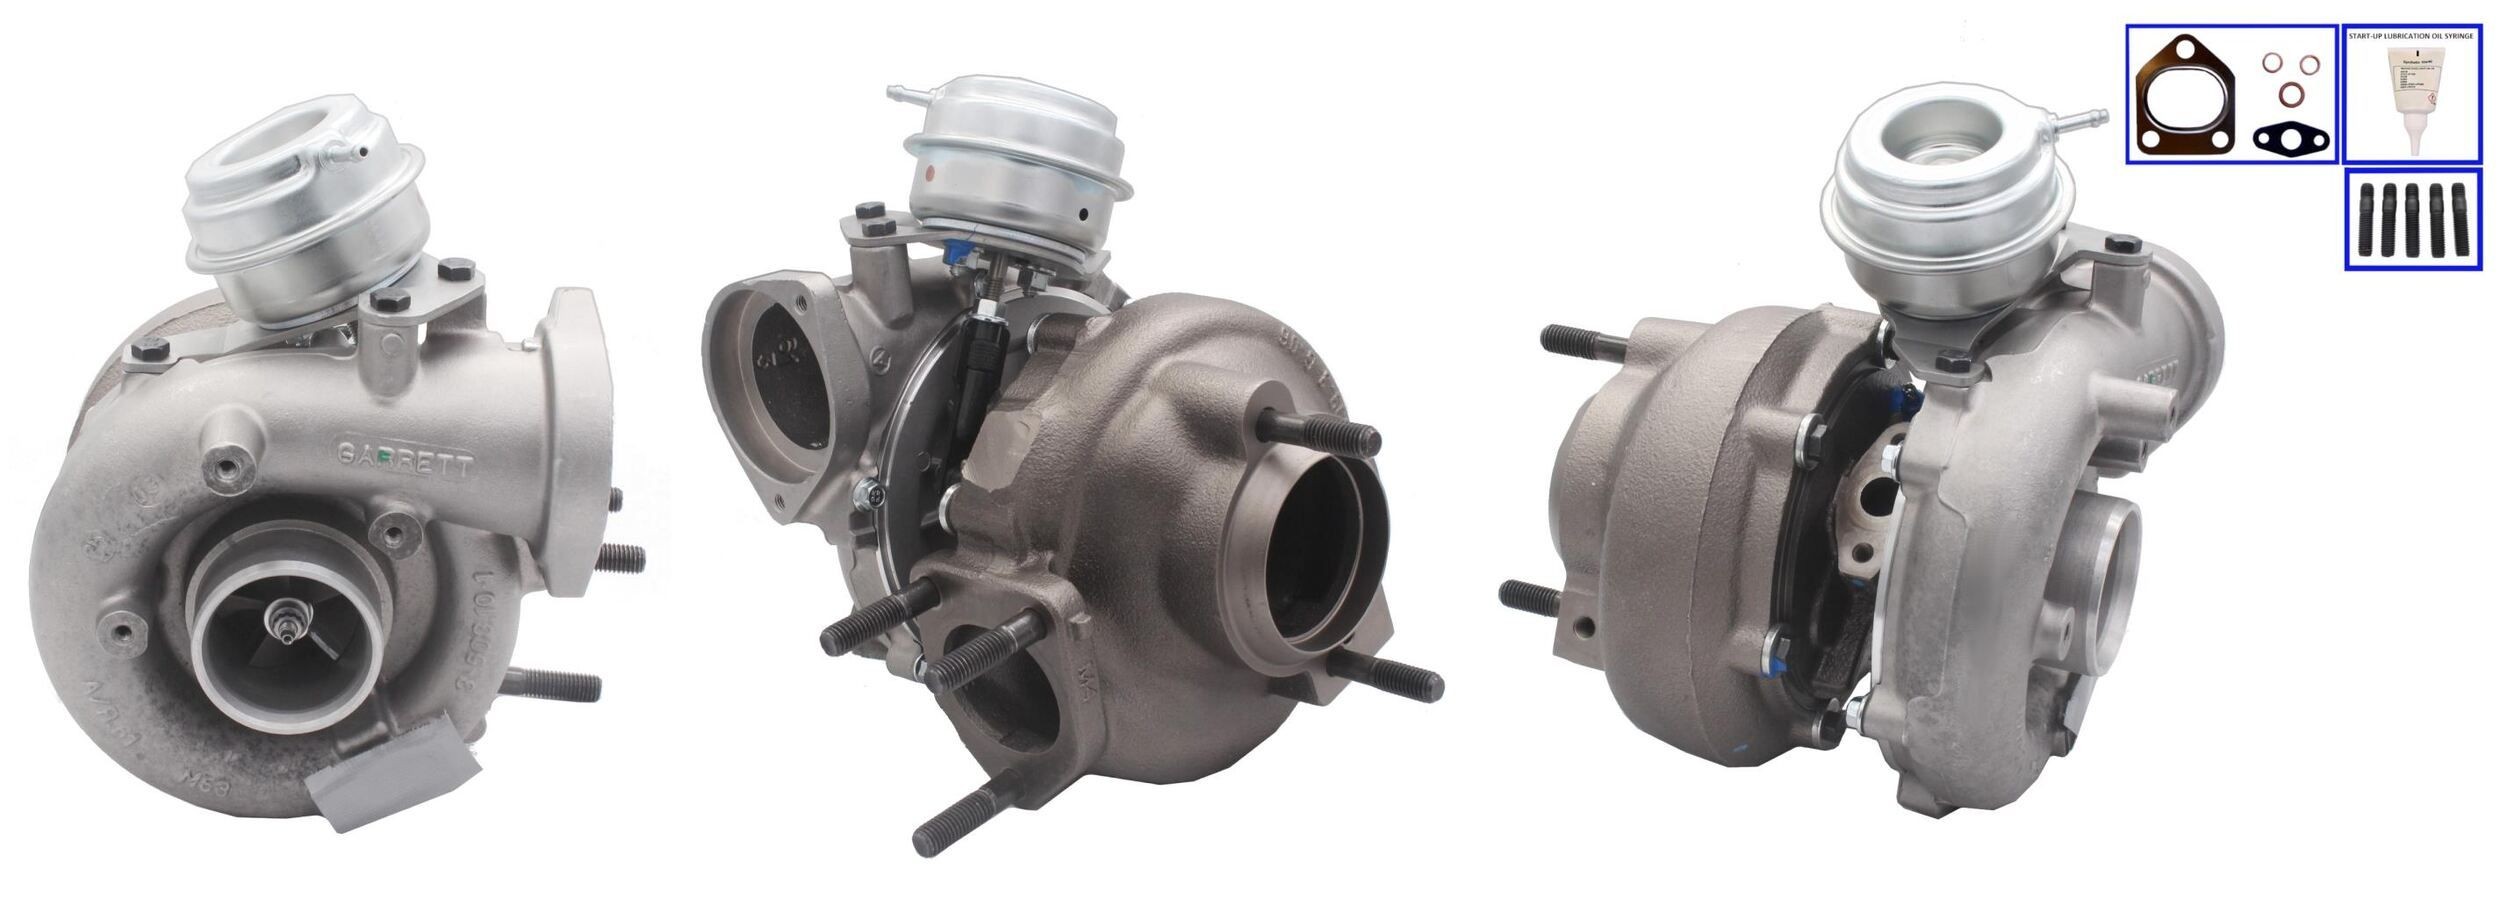 LUCAS LTRPA7253646 Turbocharger Exhaust Turbocharger, Pneumatically controlled actuator, with gaskets/seals